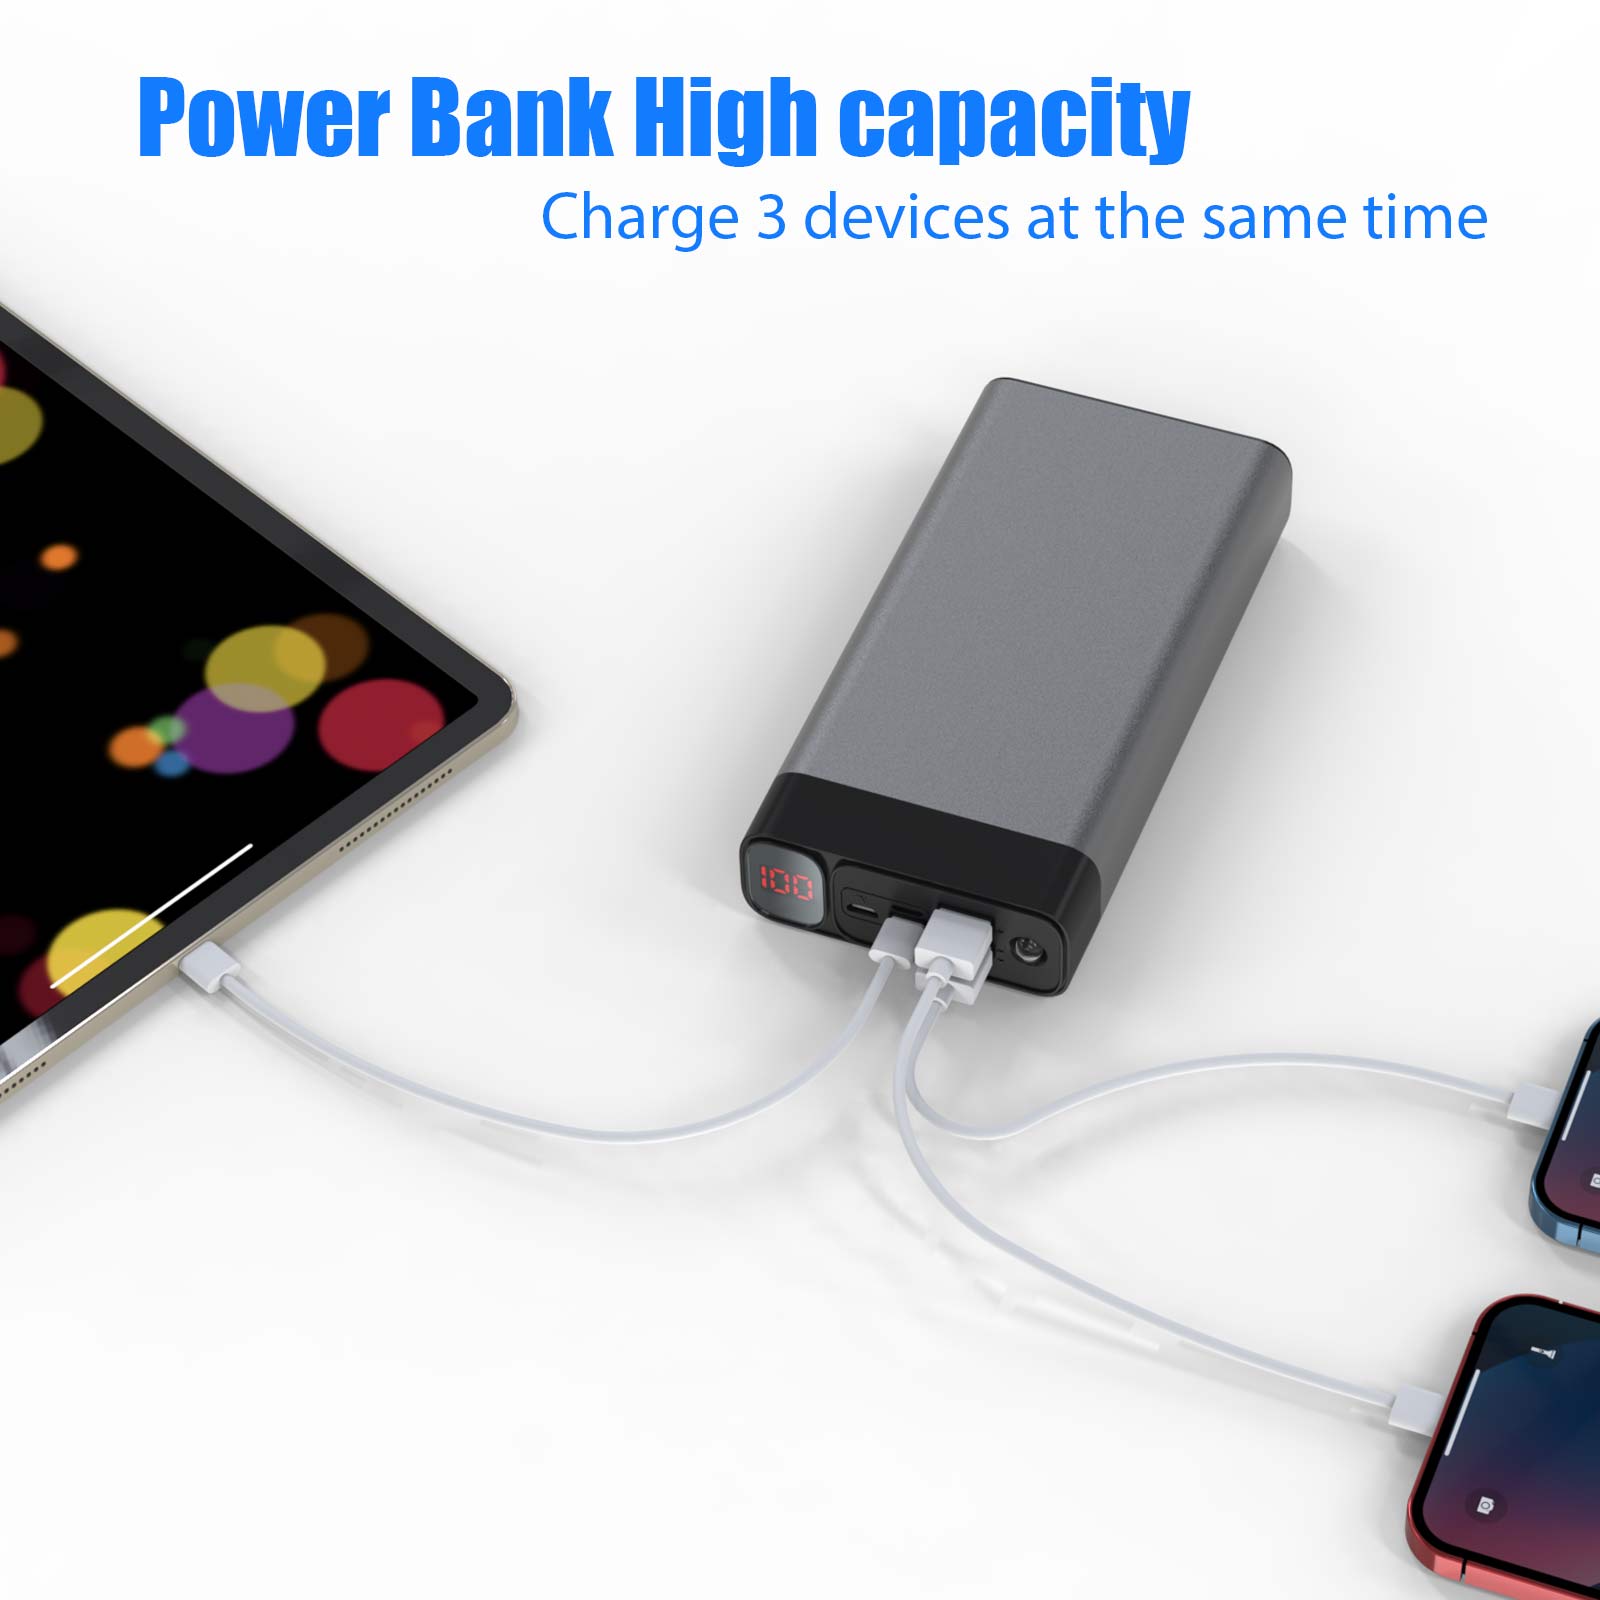 Toospon Power Bank 50000mAh High cost Safety Metal Shell 22.5W PD 20W Phone Portable Charger & Quick Charger External Battery  For iphone, ipad, Samsung, Huawei, Smartphones Speaker etc.